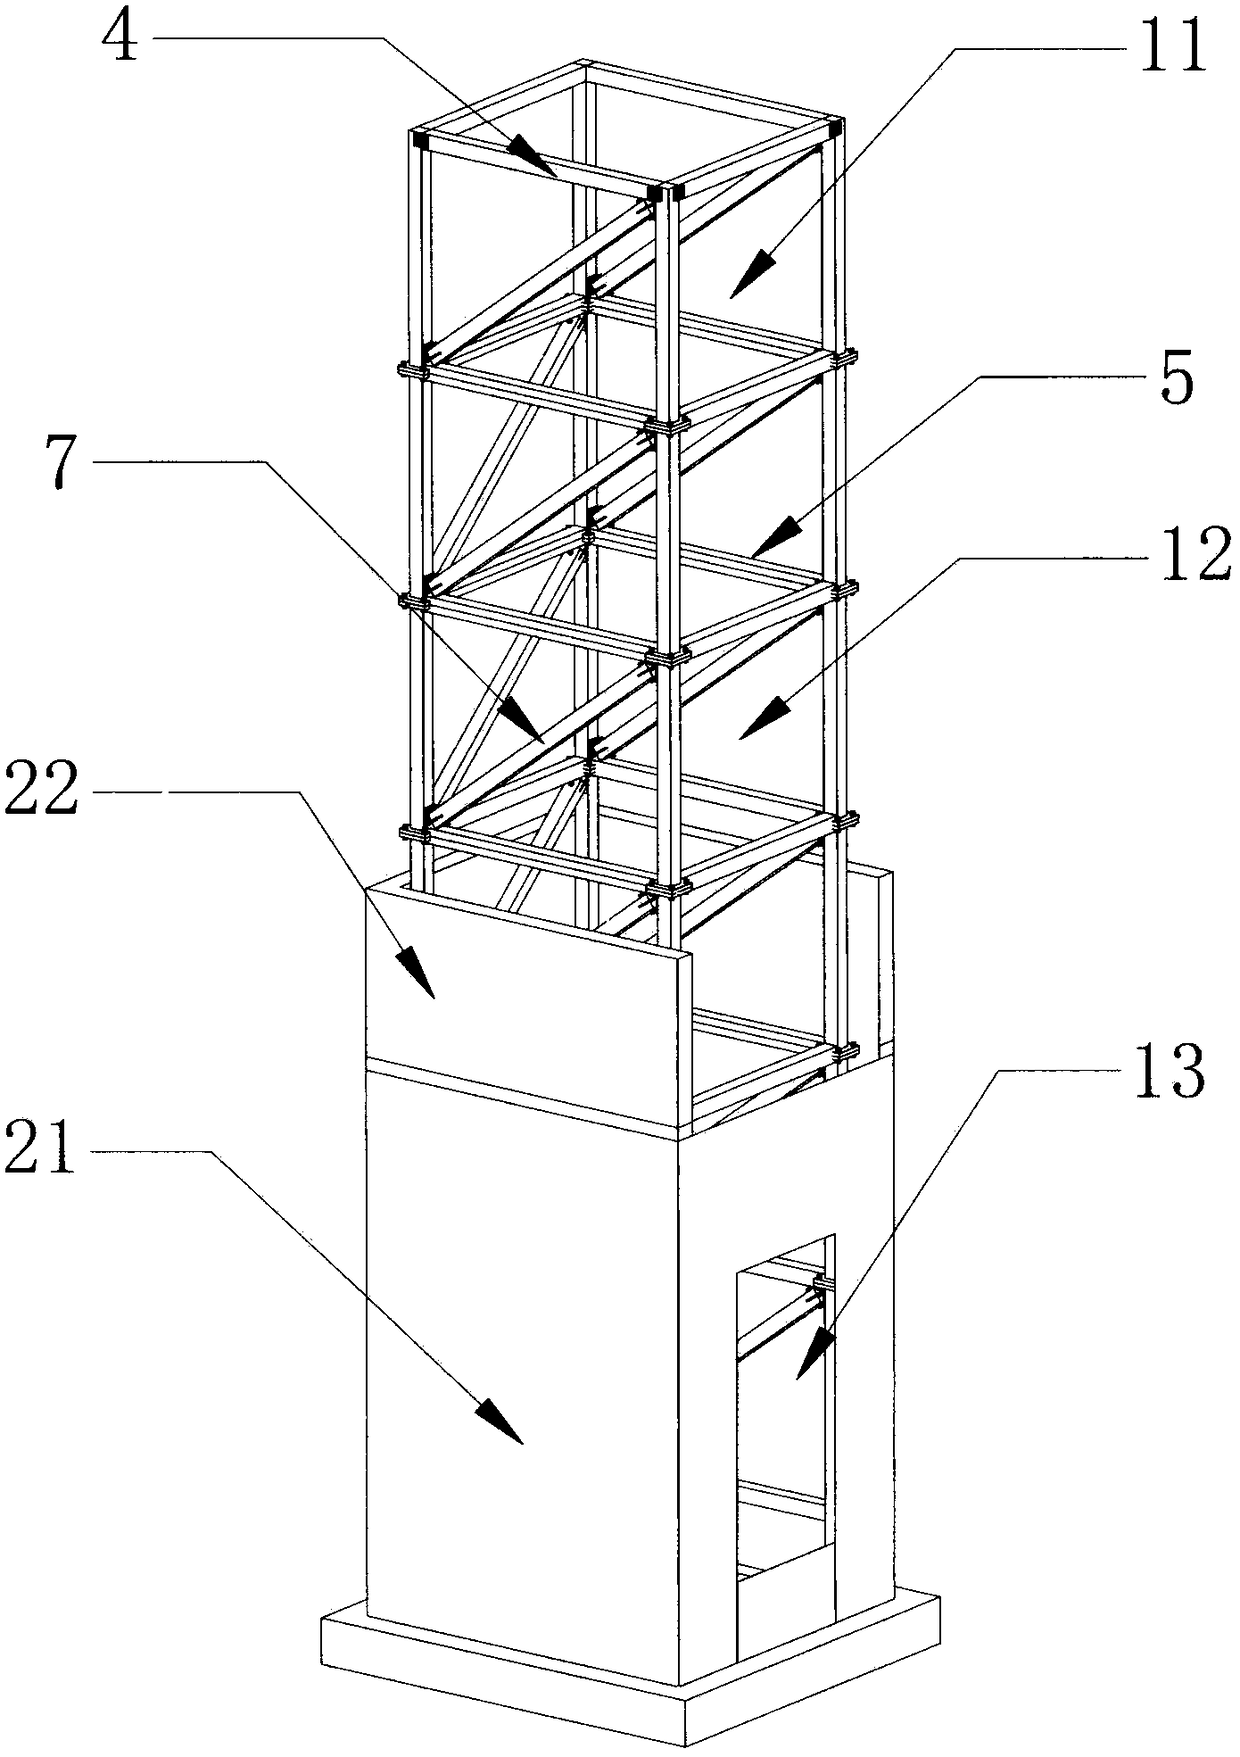 Steel-bamboo composite elevator structure